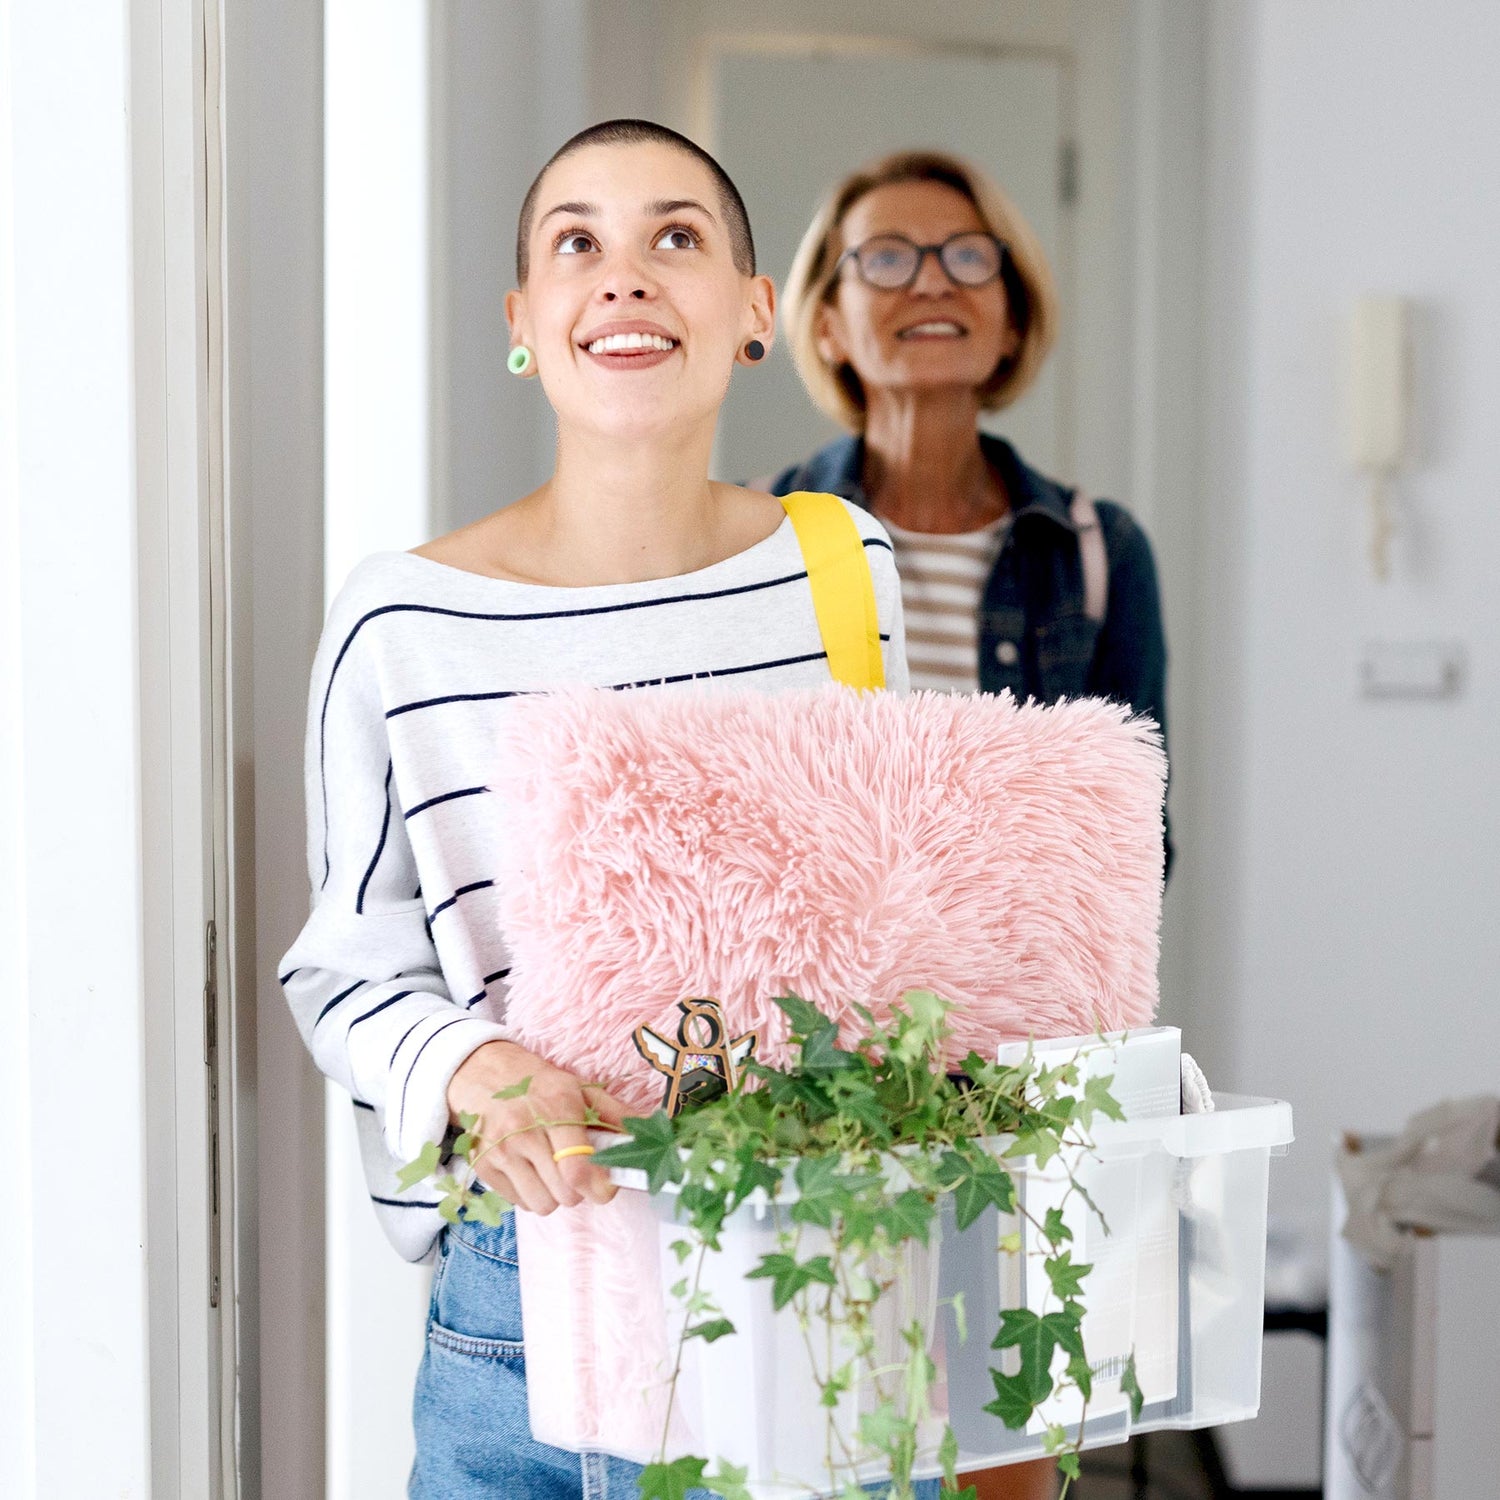 A cheerful daughter moving into her college dorm, snuggling a Mother’s Angels® Graduation ornament among her items, symbolizing a cherished graduation gift. Her mother looks on with pride, the perfect representation of a memorable graduation present for her.